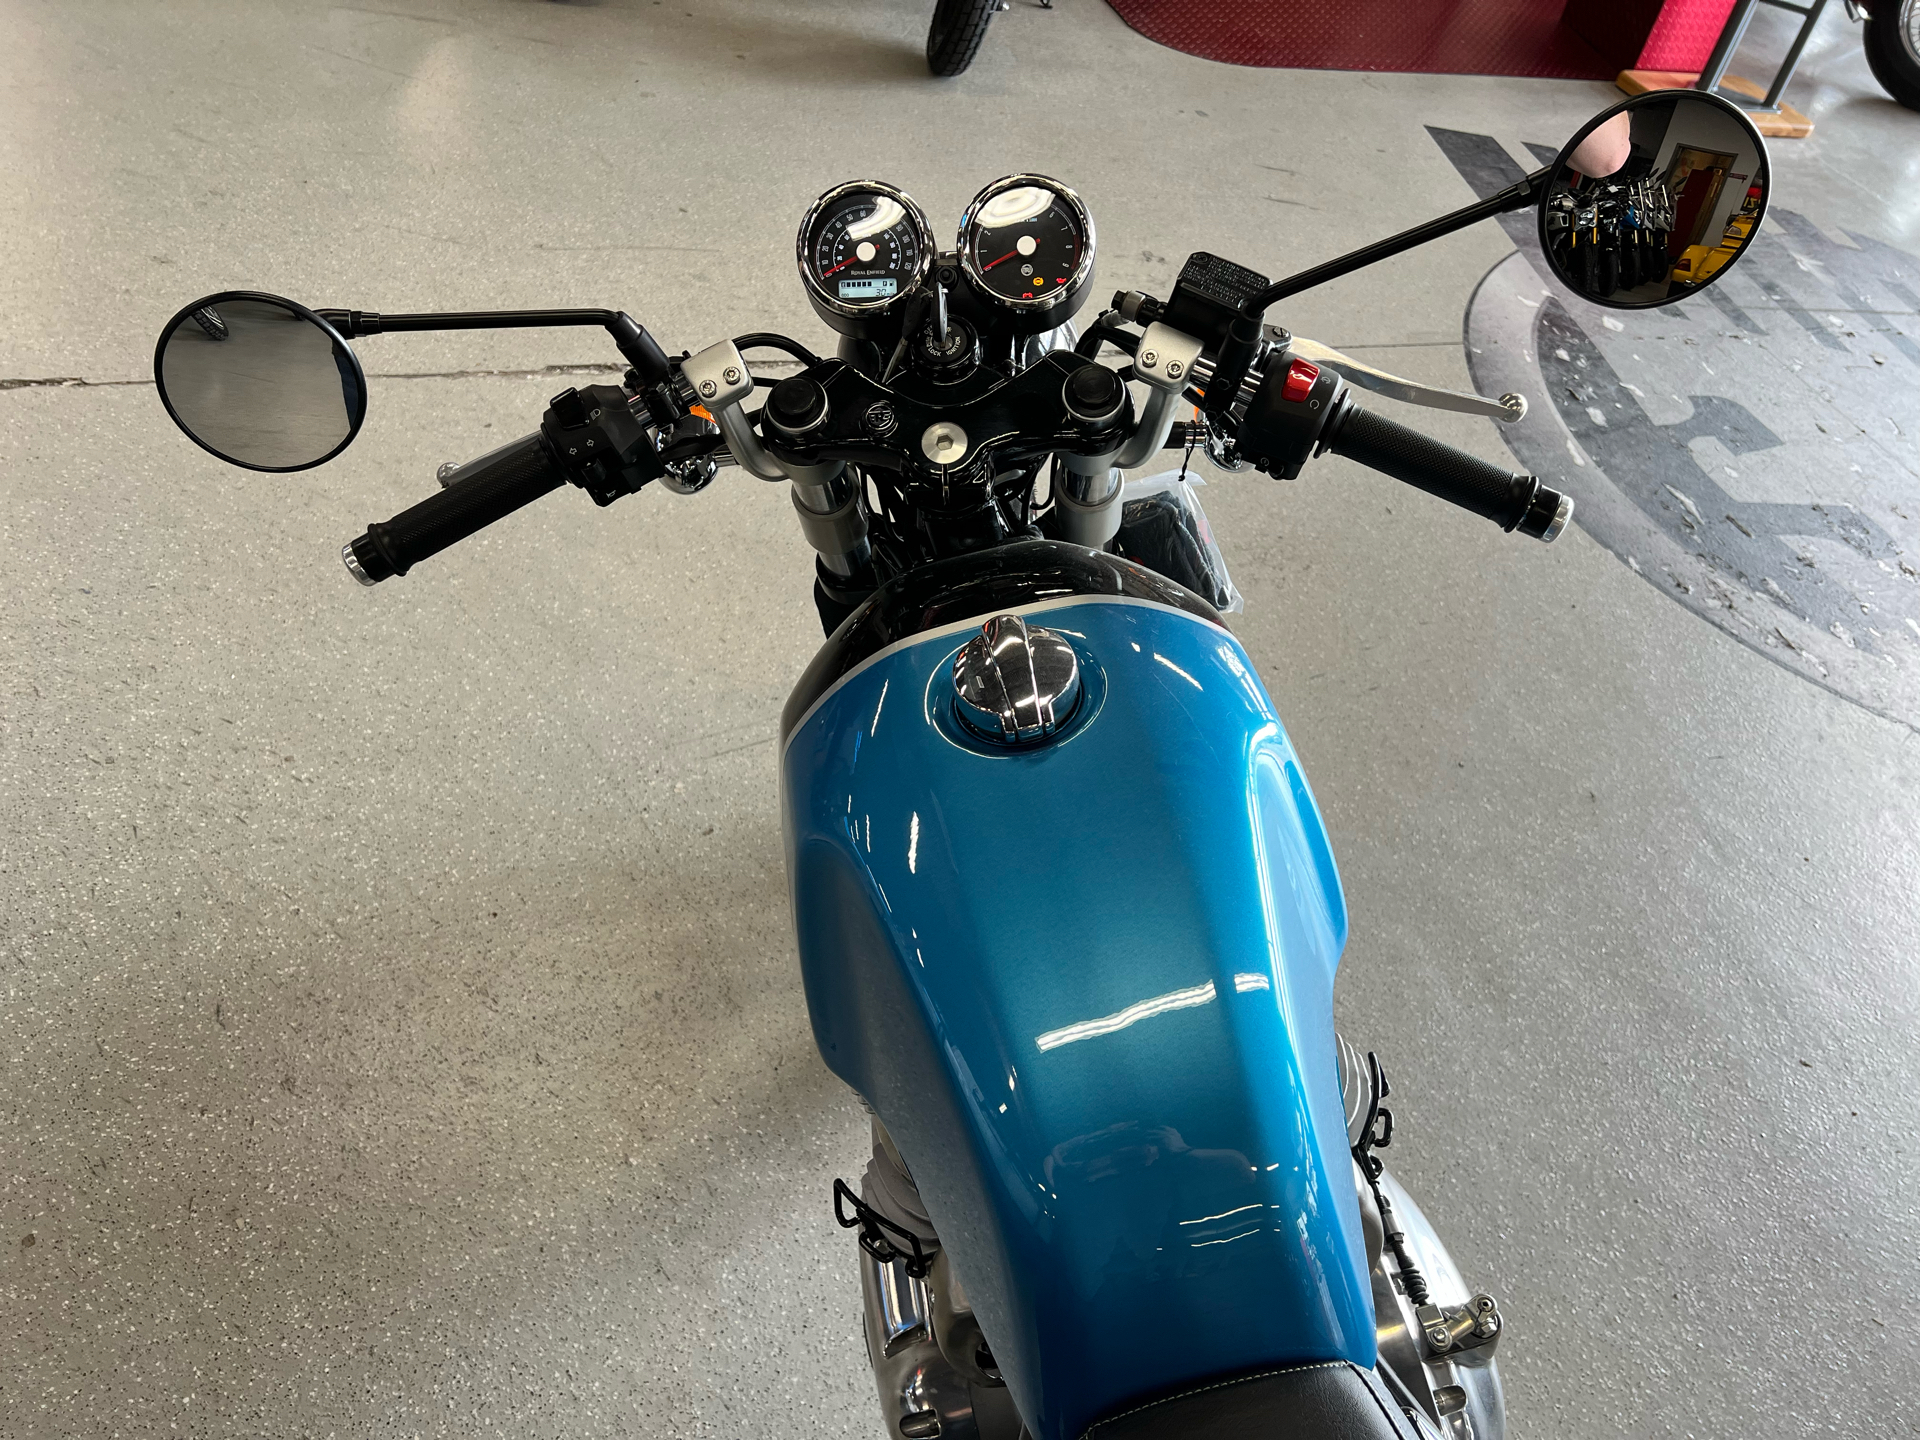 2022 Royal Enfield Continental GT 650 in Fort Myers, Florida - Photo 6